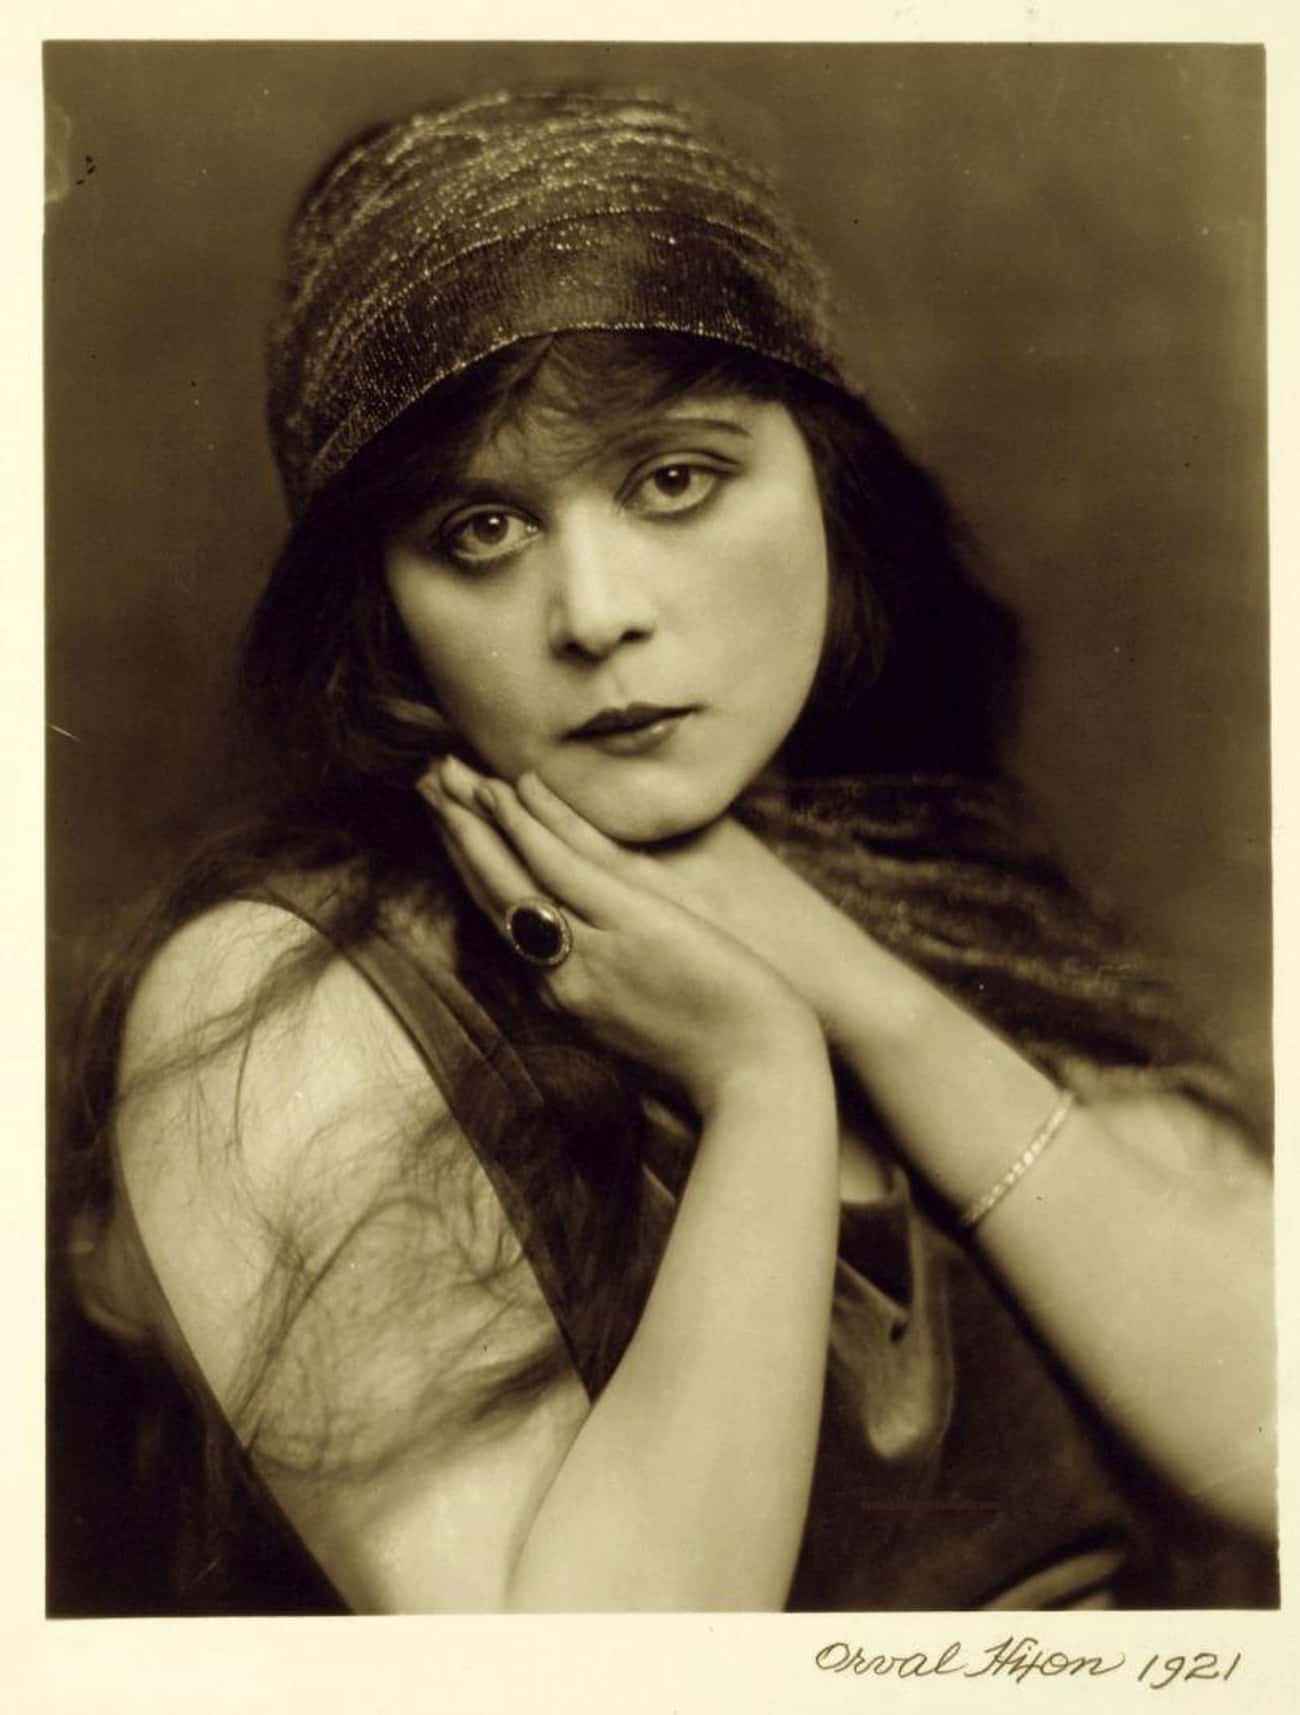 Theda Bara Was Considered A Hollywood "Vamp"